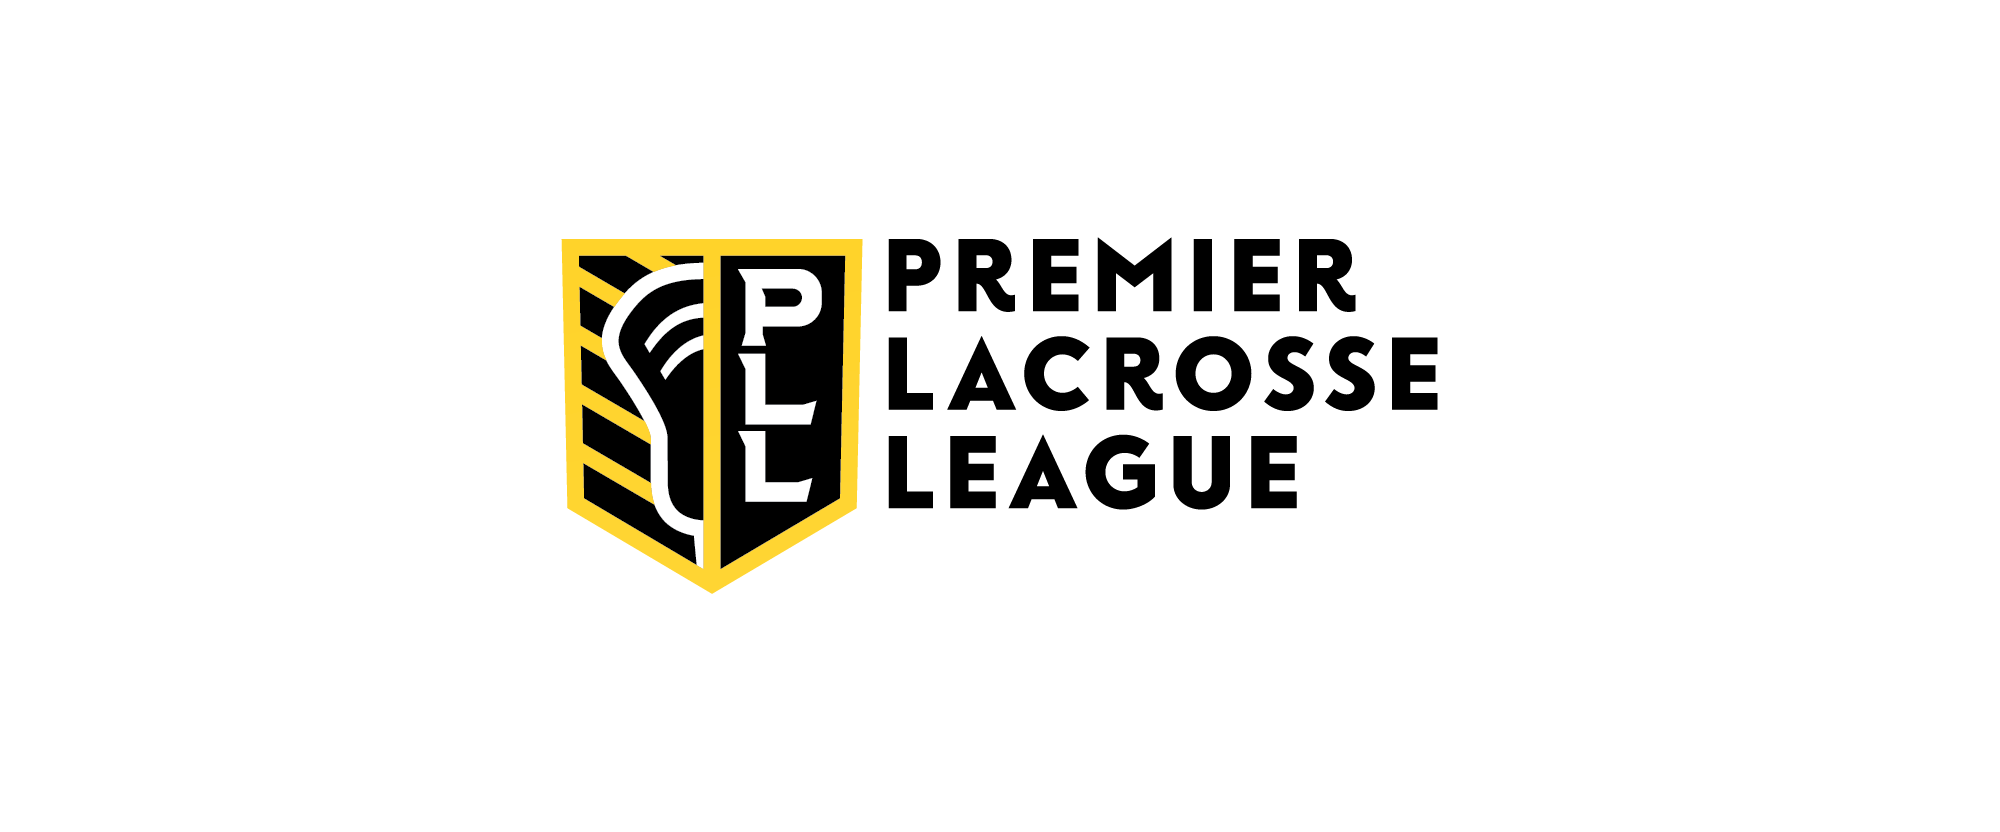 Lacrosse Logo - Brand New: New Logo and Identity for Premiere Lacrosse League (and ...